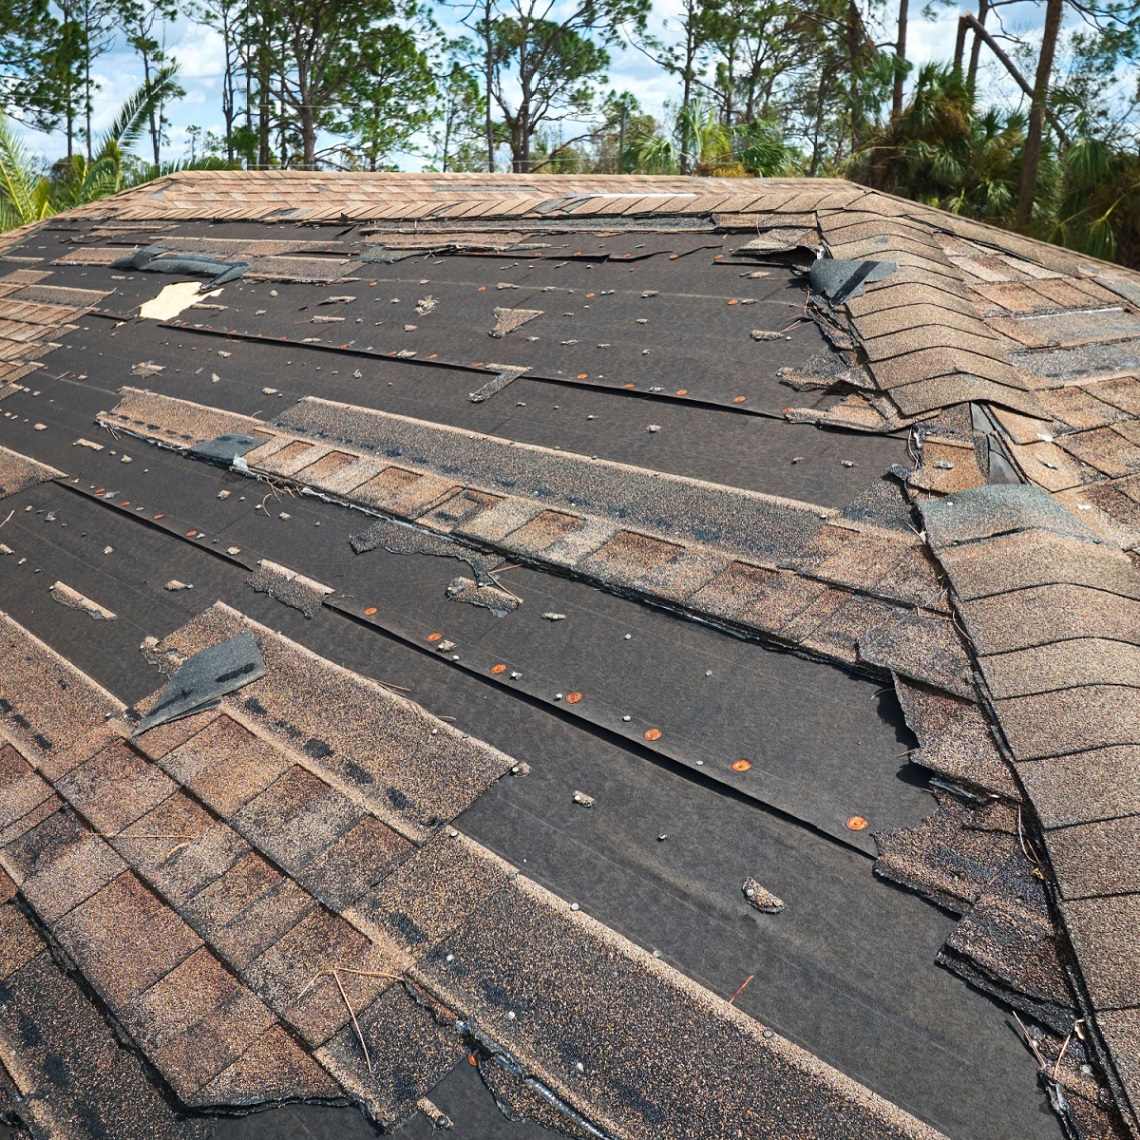 Rosenberg roof with clear signs of wind roof damage.